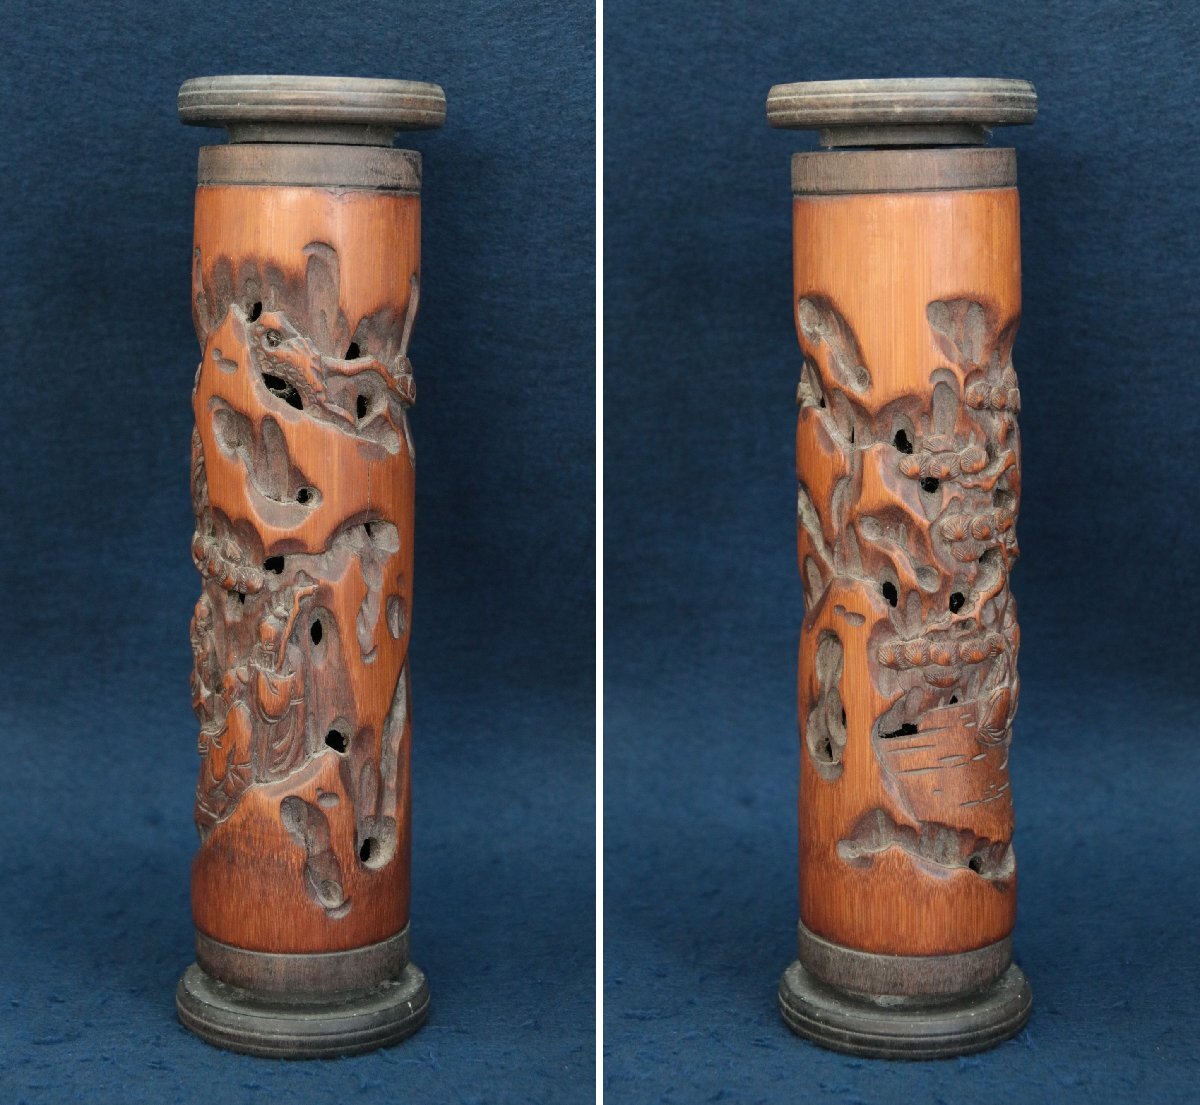  China. old . tube . person bamboo incense stick ... Buddhist altar fittings Tang thing China fine art handicraft 